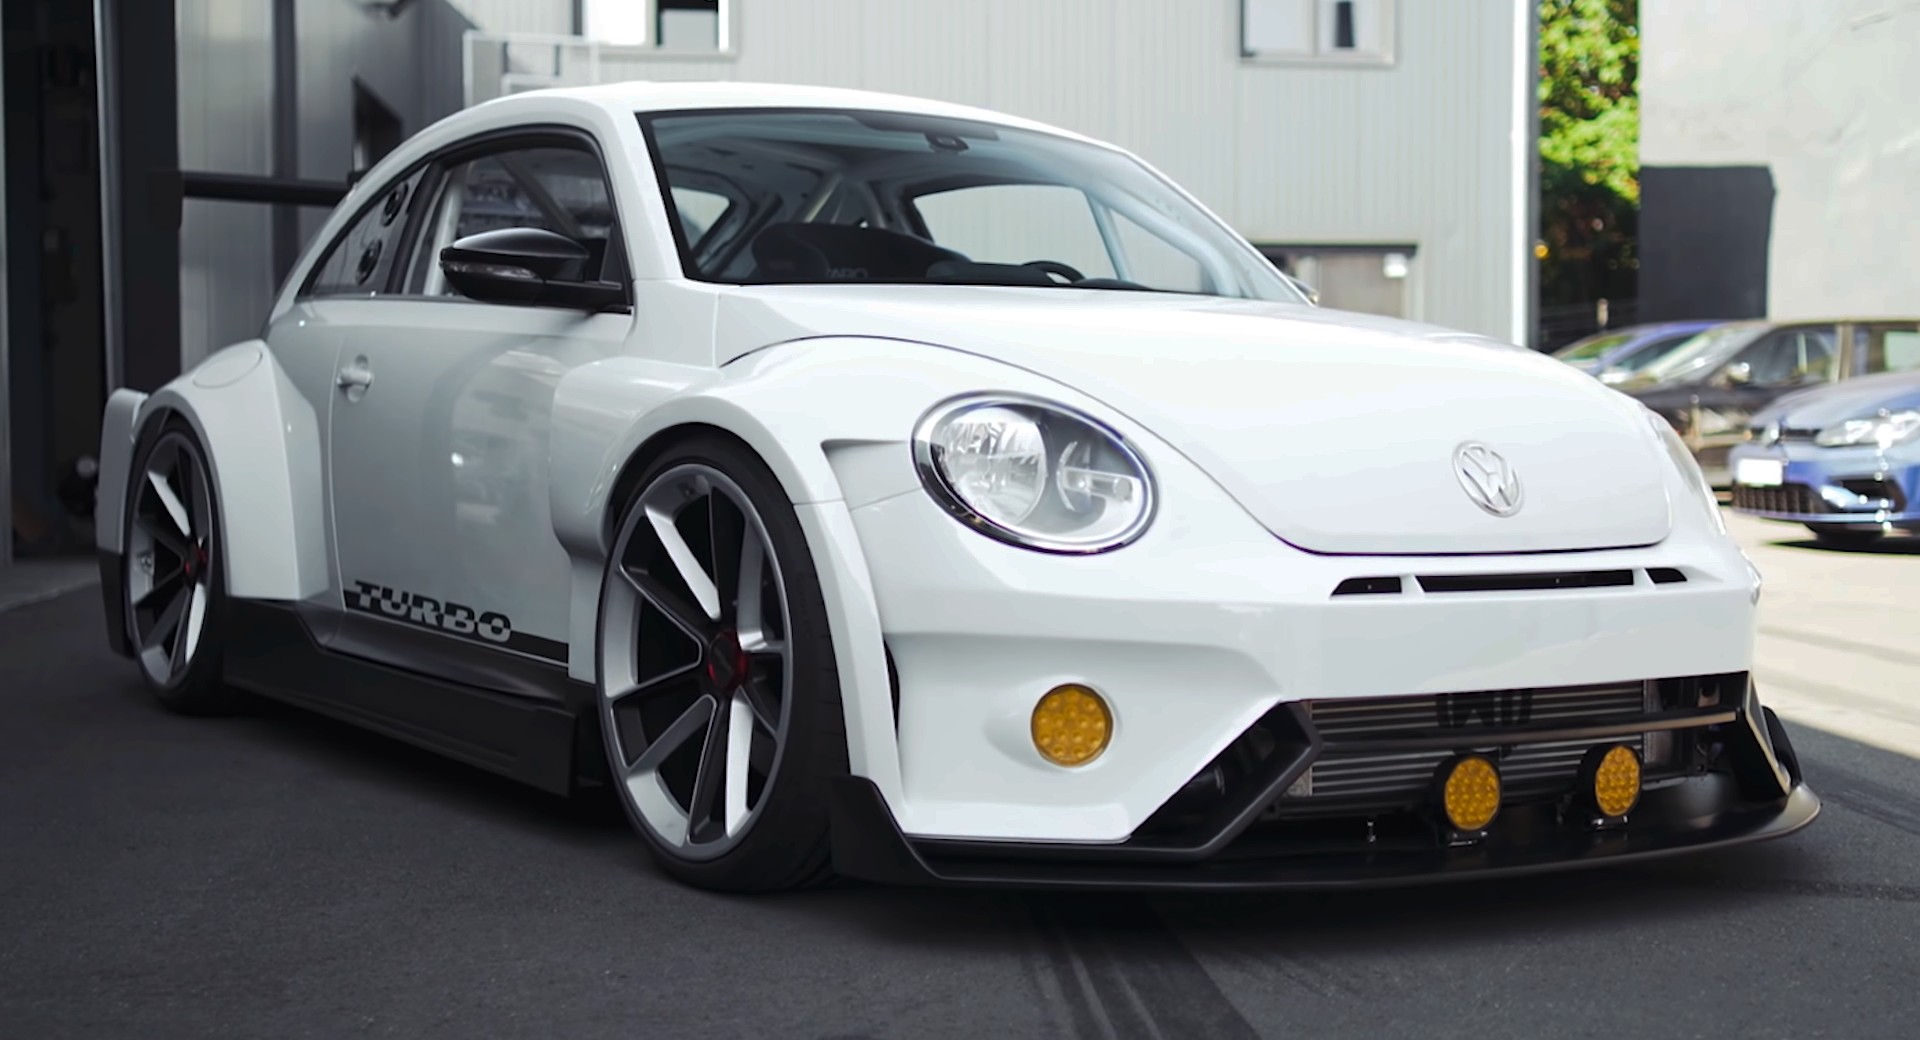 The First Vw Beetle Gt Conversion Is Complete And It Looks Ready For The Track Carscoops